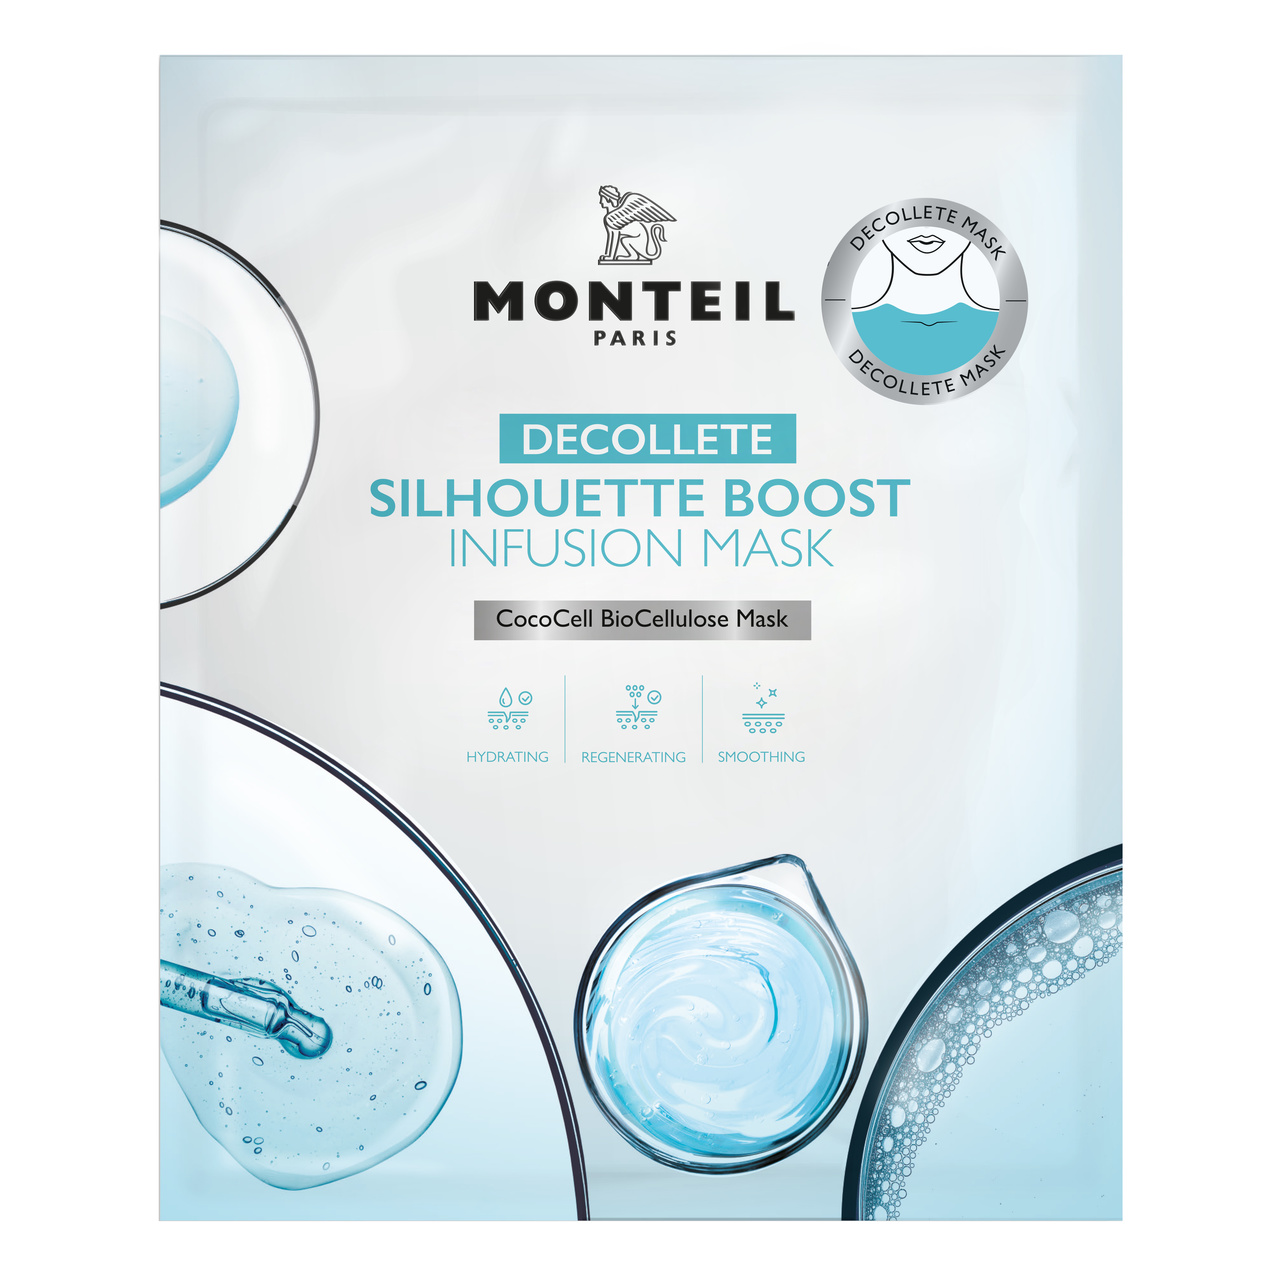 Silhouette Boost Infusion Mask